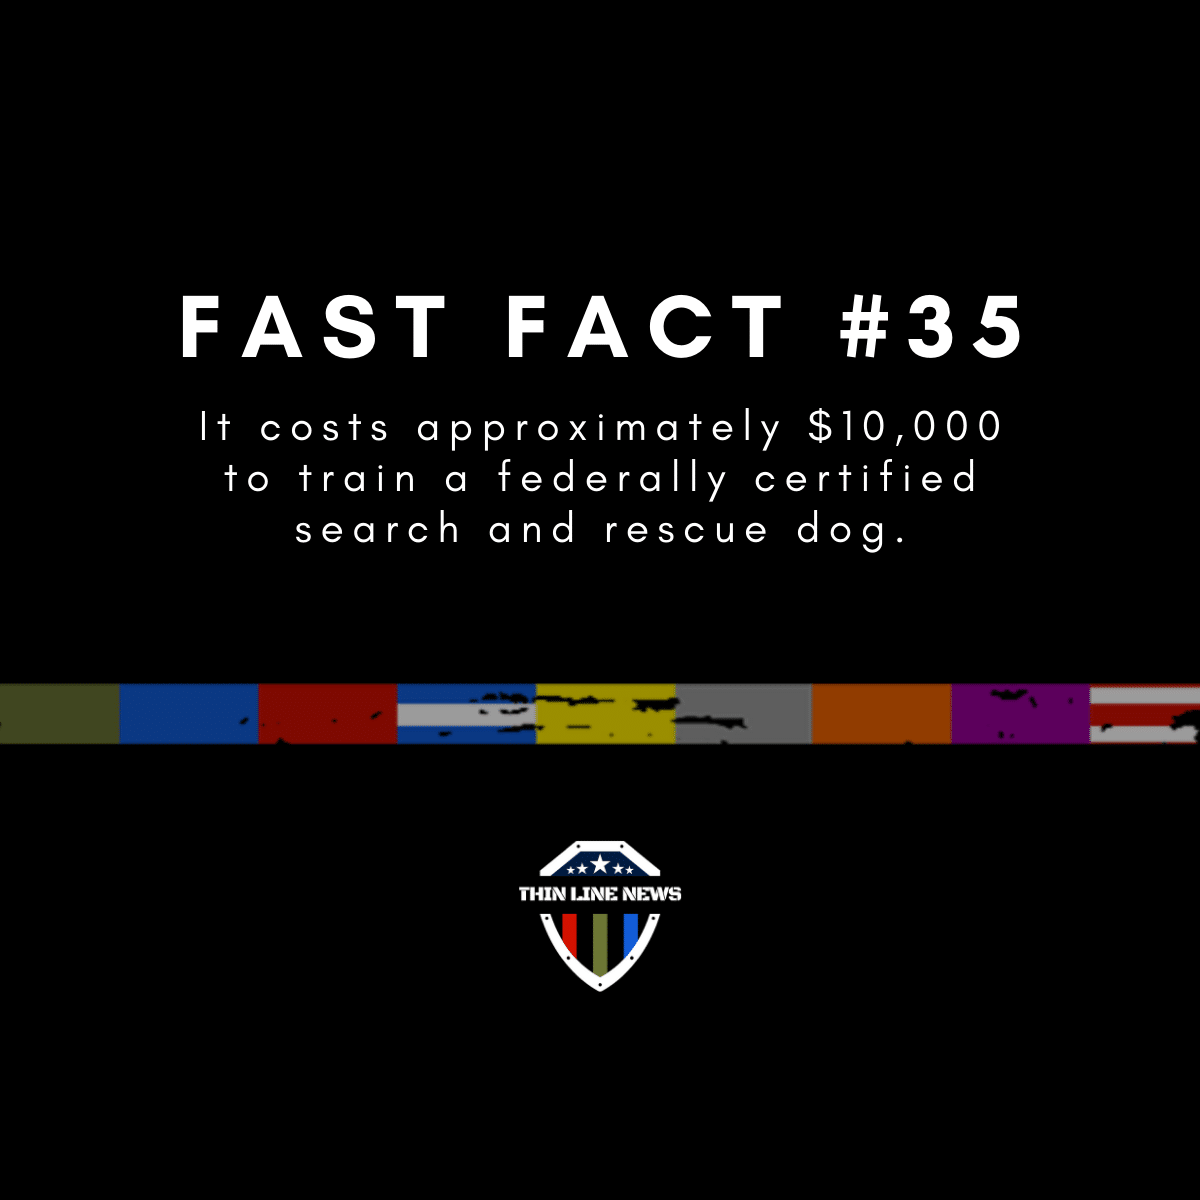 fast fact #35